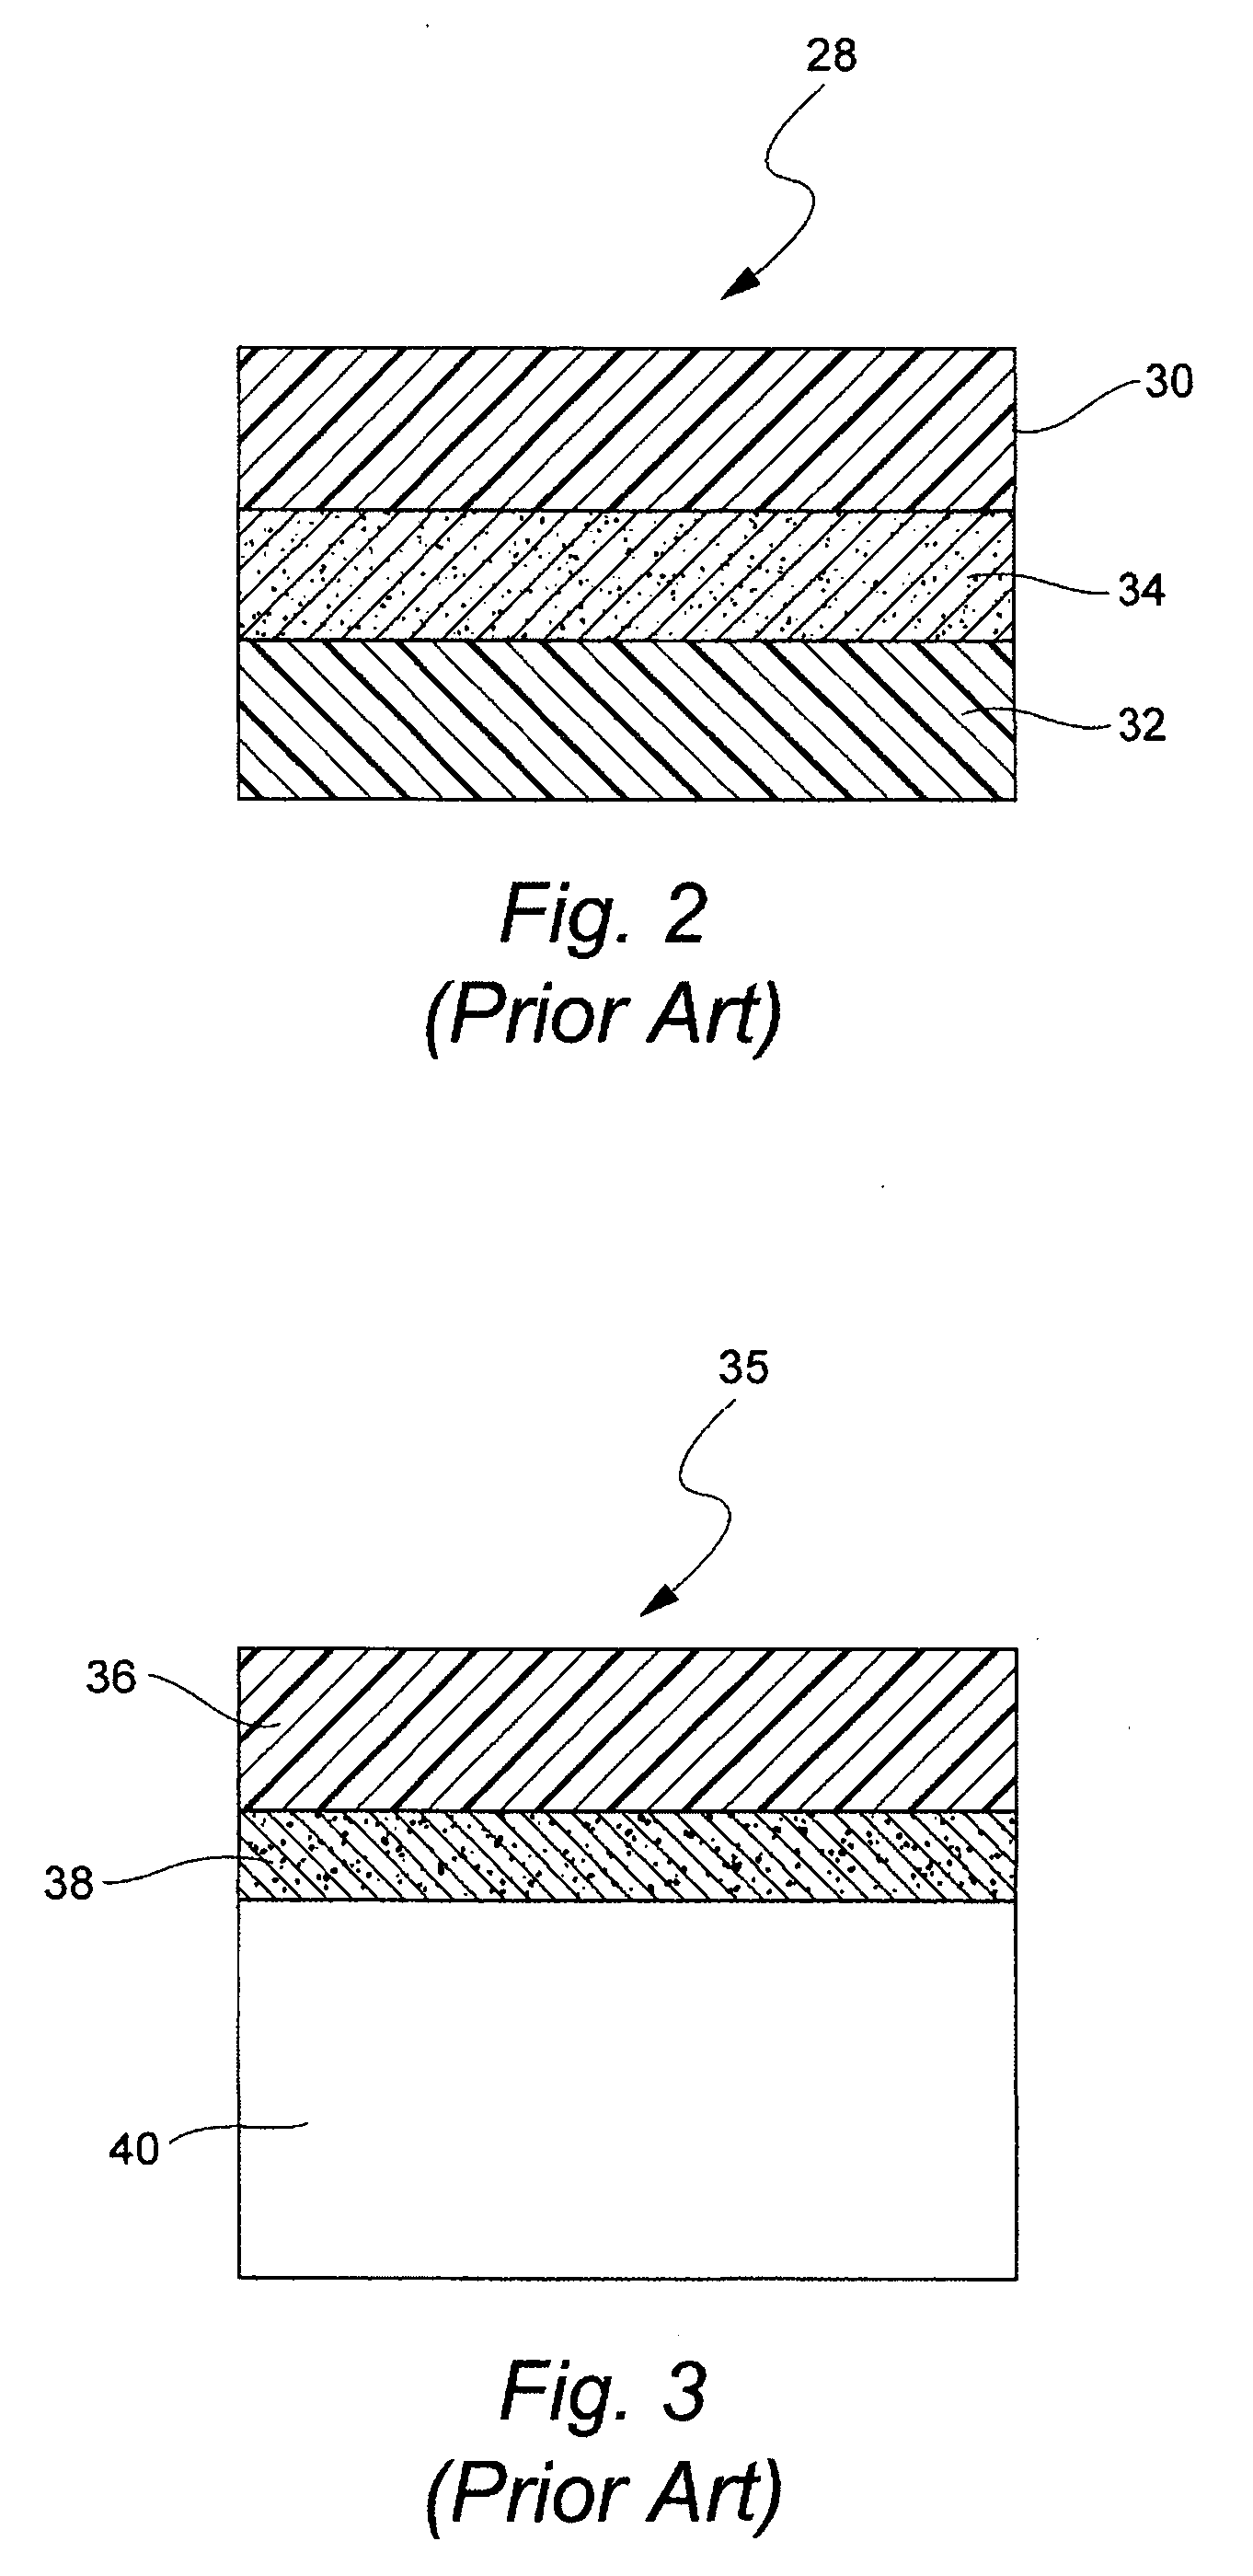 Electrical heater with particular application to humidification and fluid warming